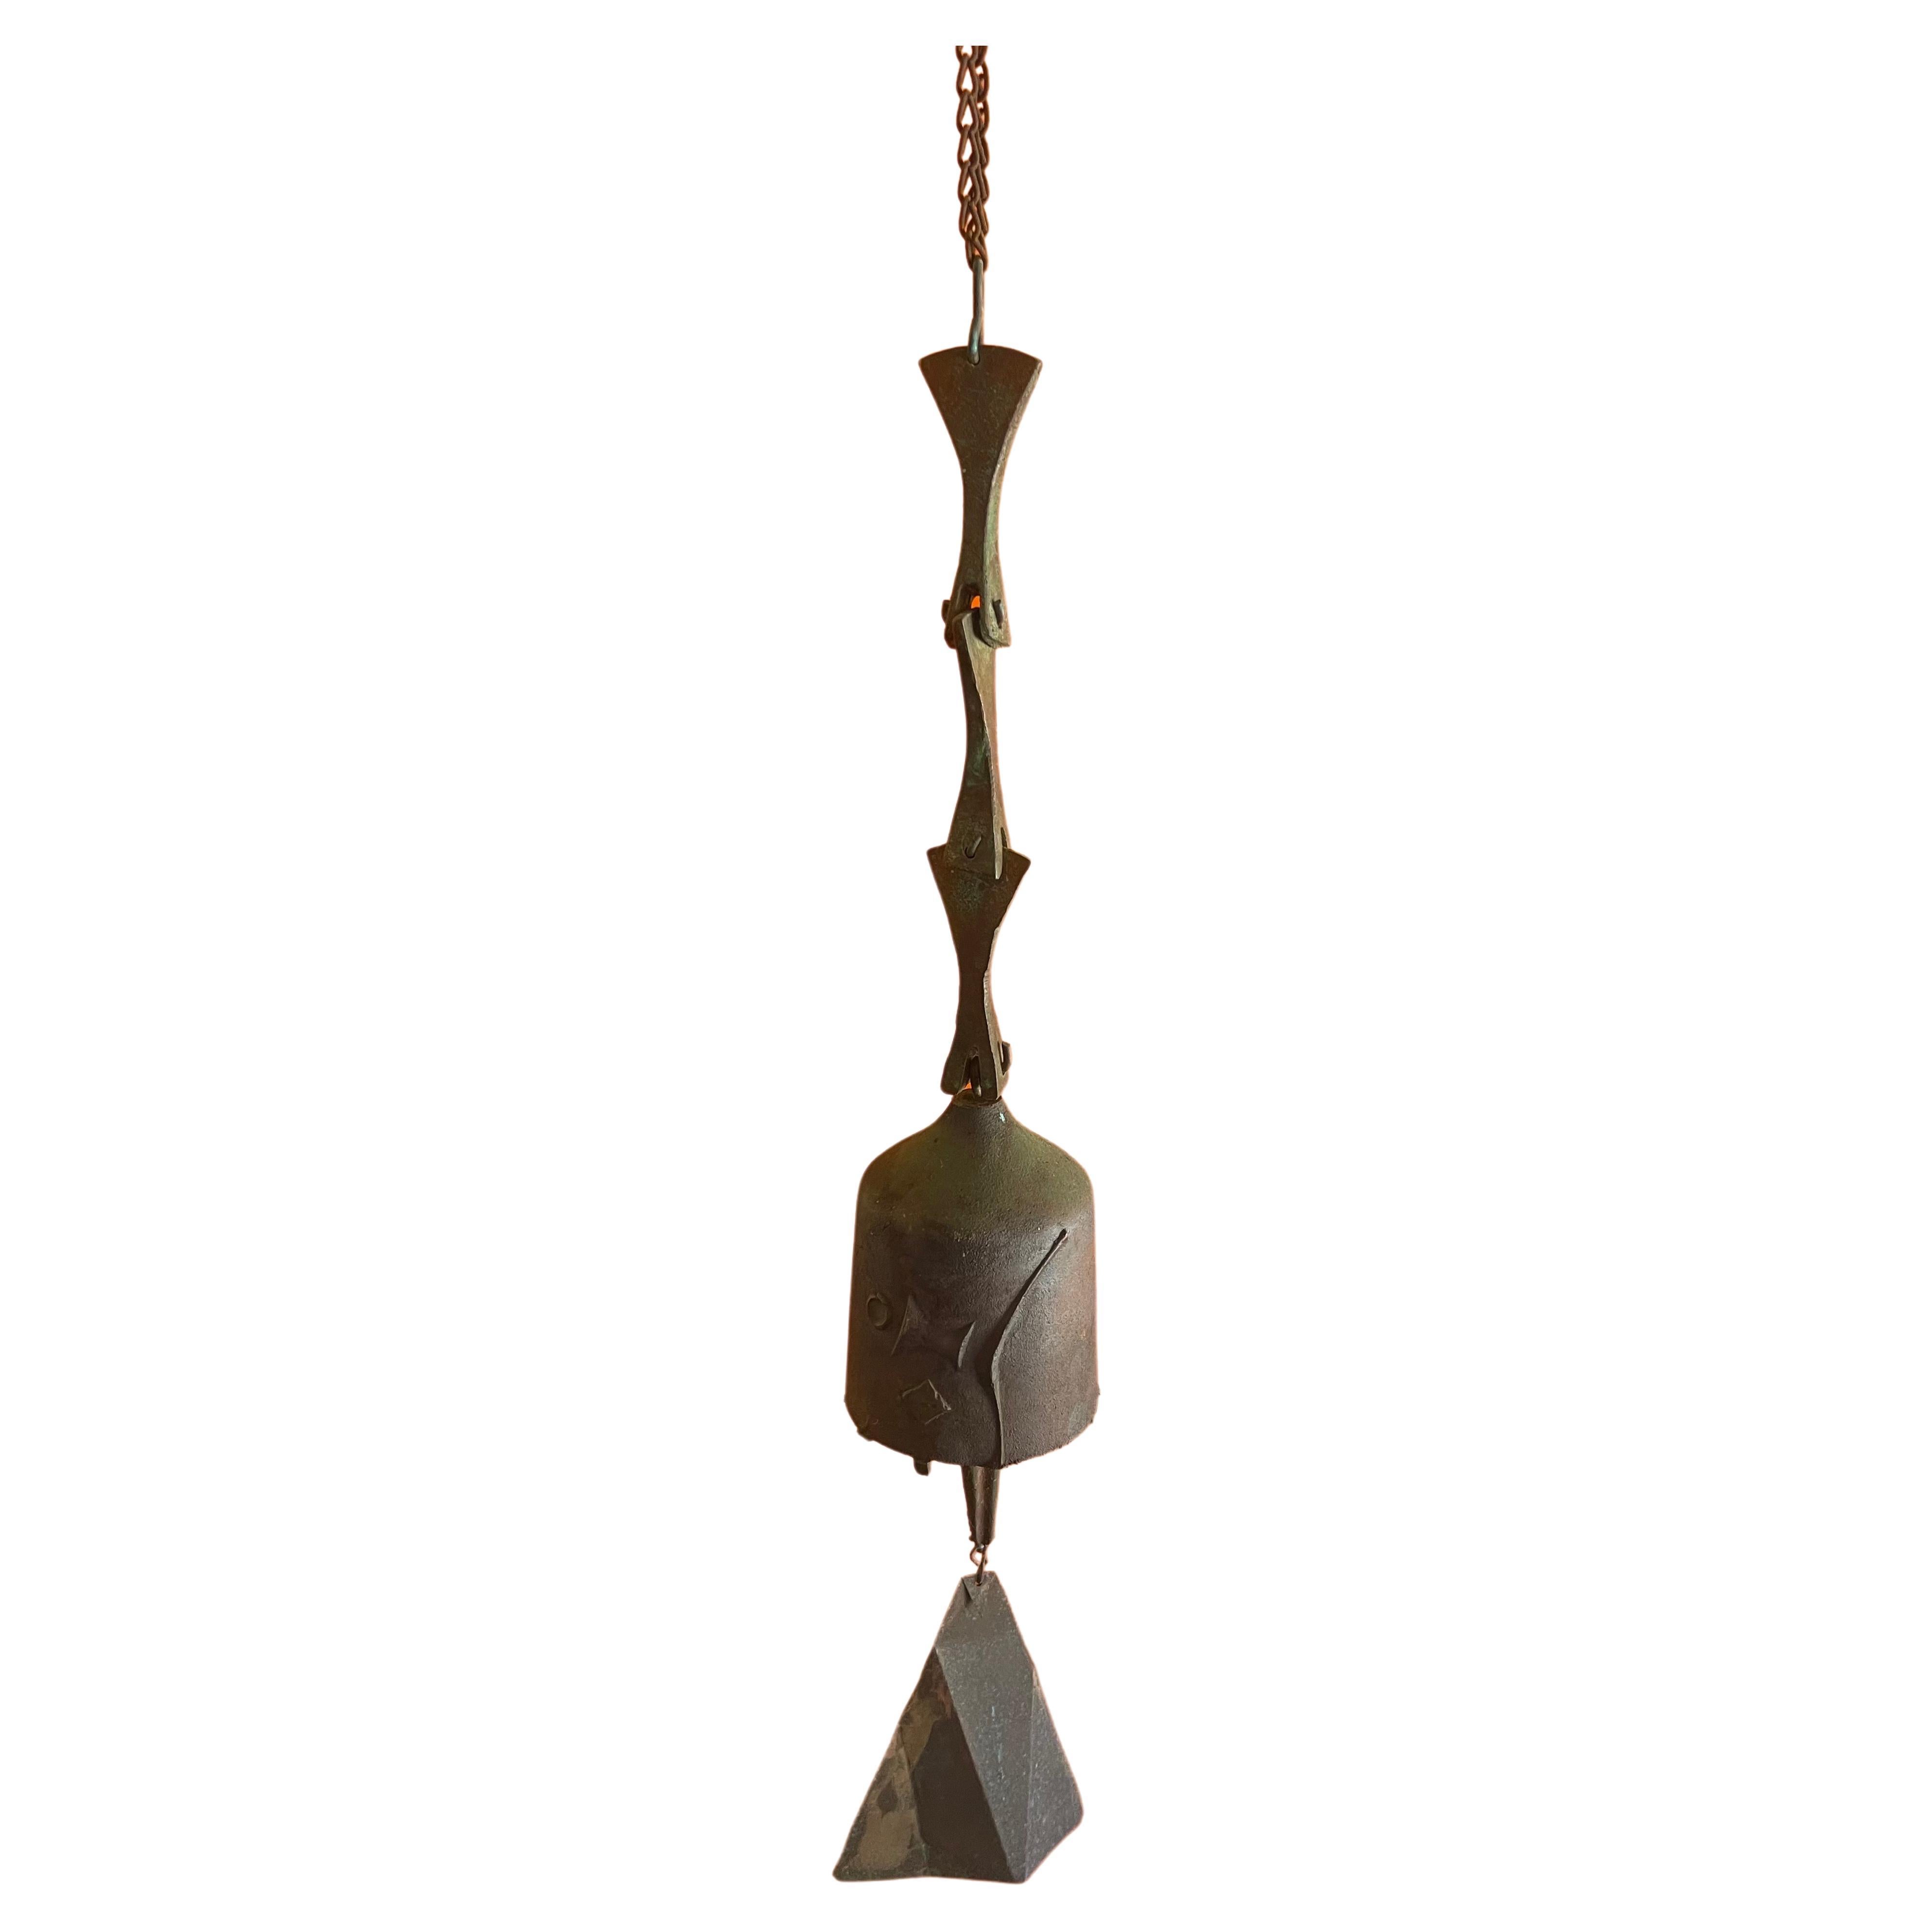 Bronze wind chime / bell by Paolo Soleri for Cosanti, circa 1970s. The piece is is 49.5